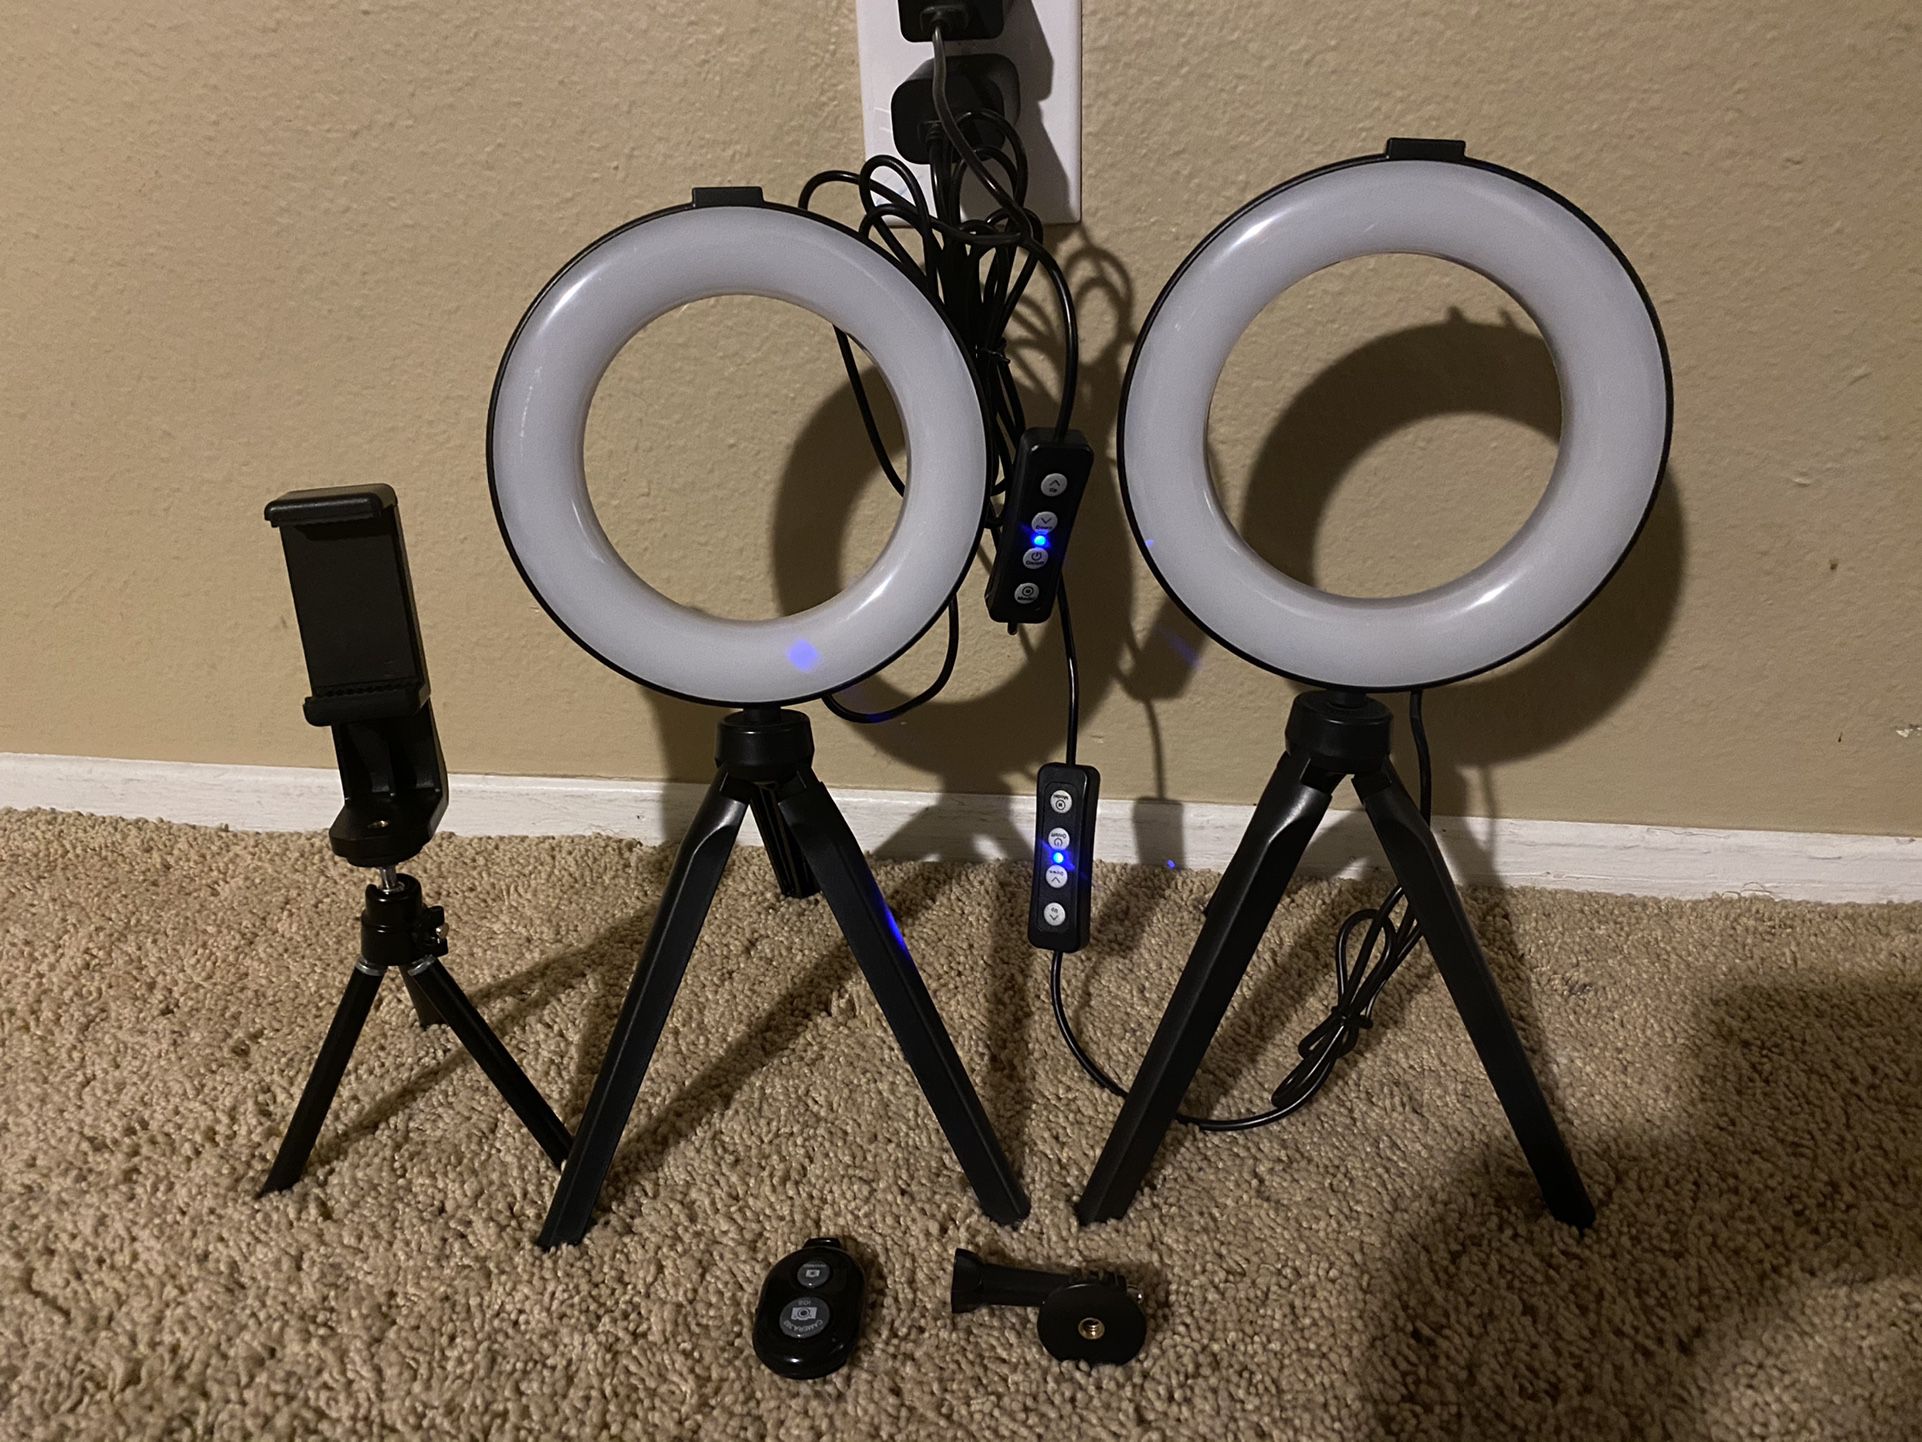 TWO 6” LED Ring light 3 Modes, Remote, Tripod Stand